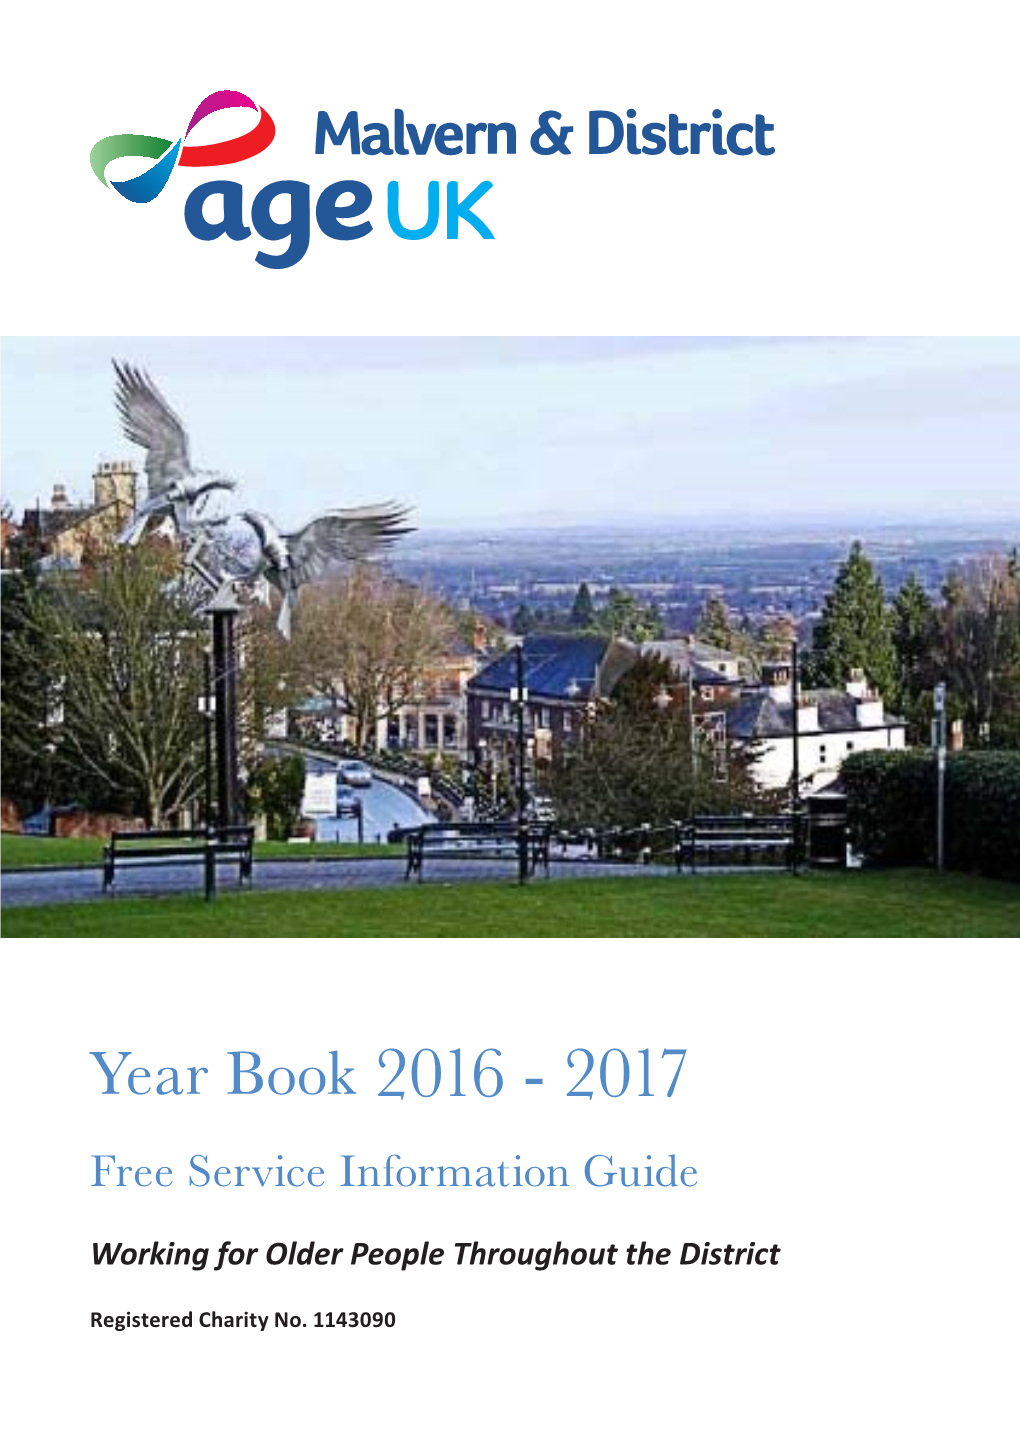 Year Book 2016 - 2017 Free Service Information Guide